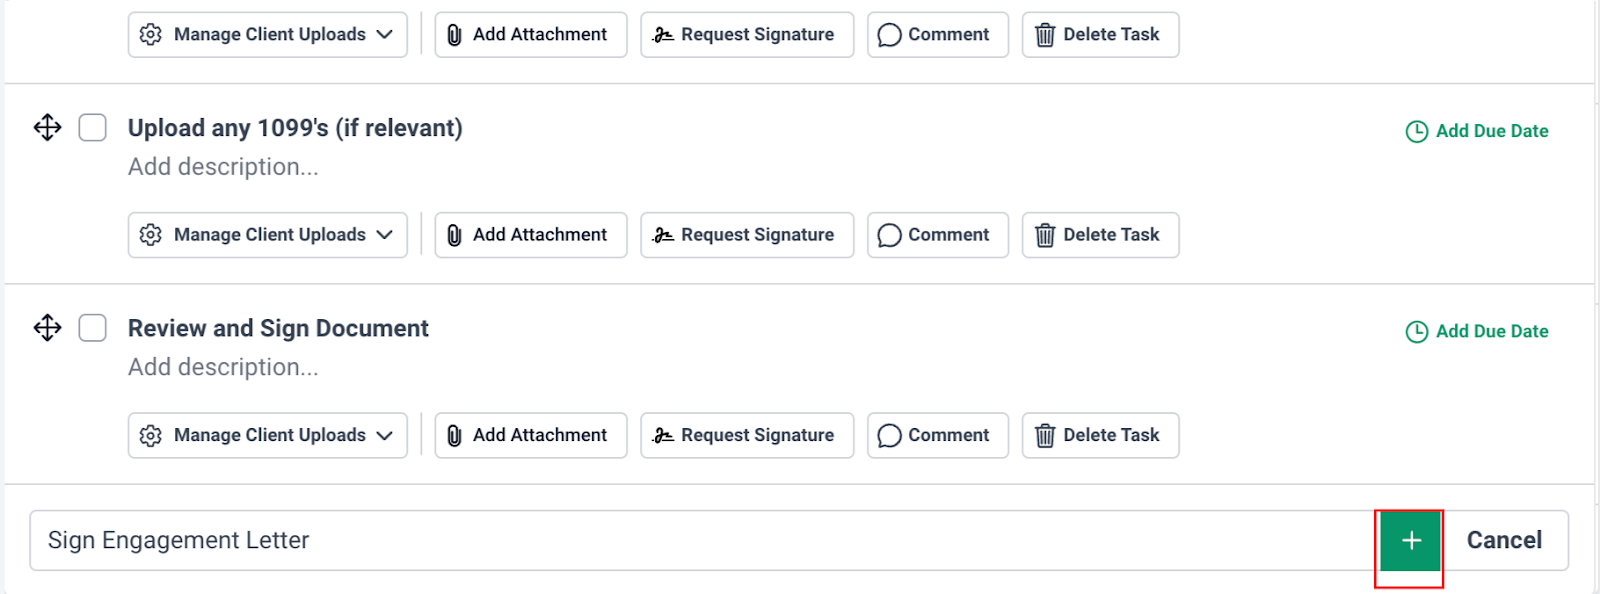 create a client requesting for signature for engagement letter